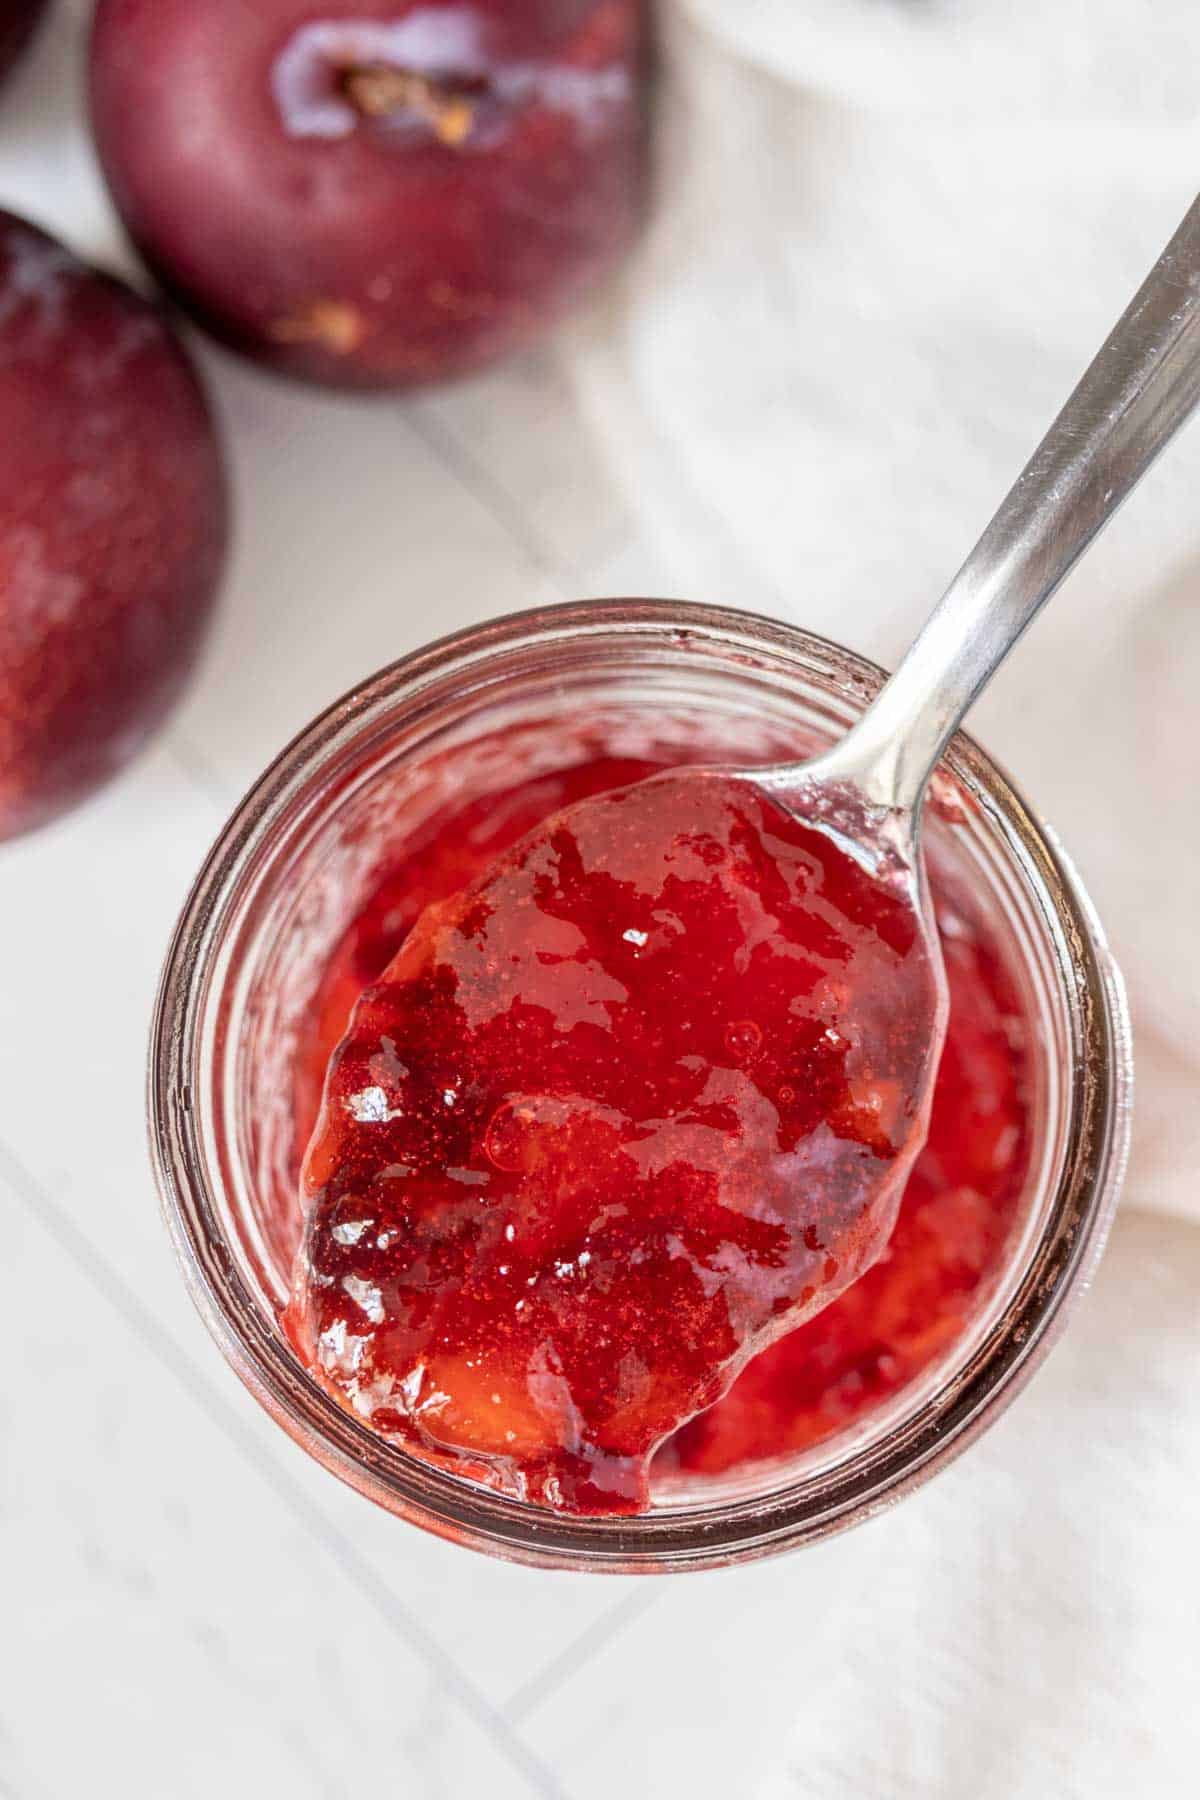 Plum jam in a jar with a spoon.